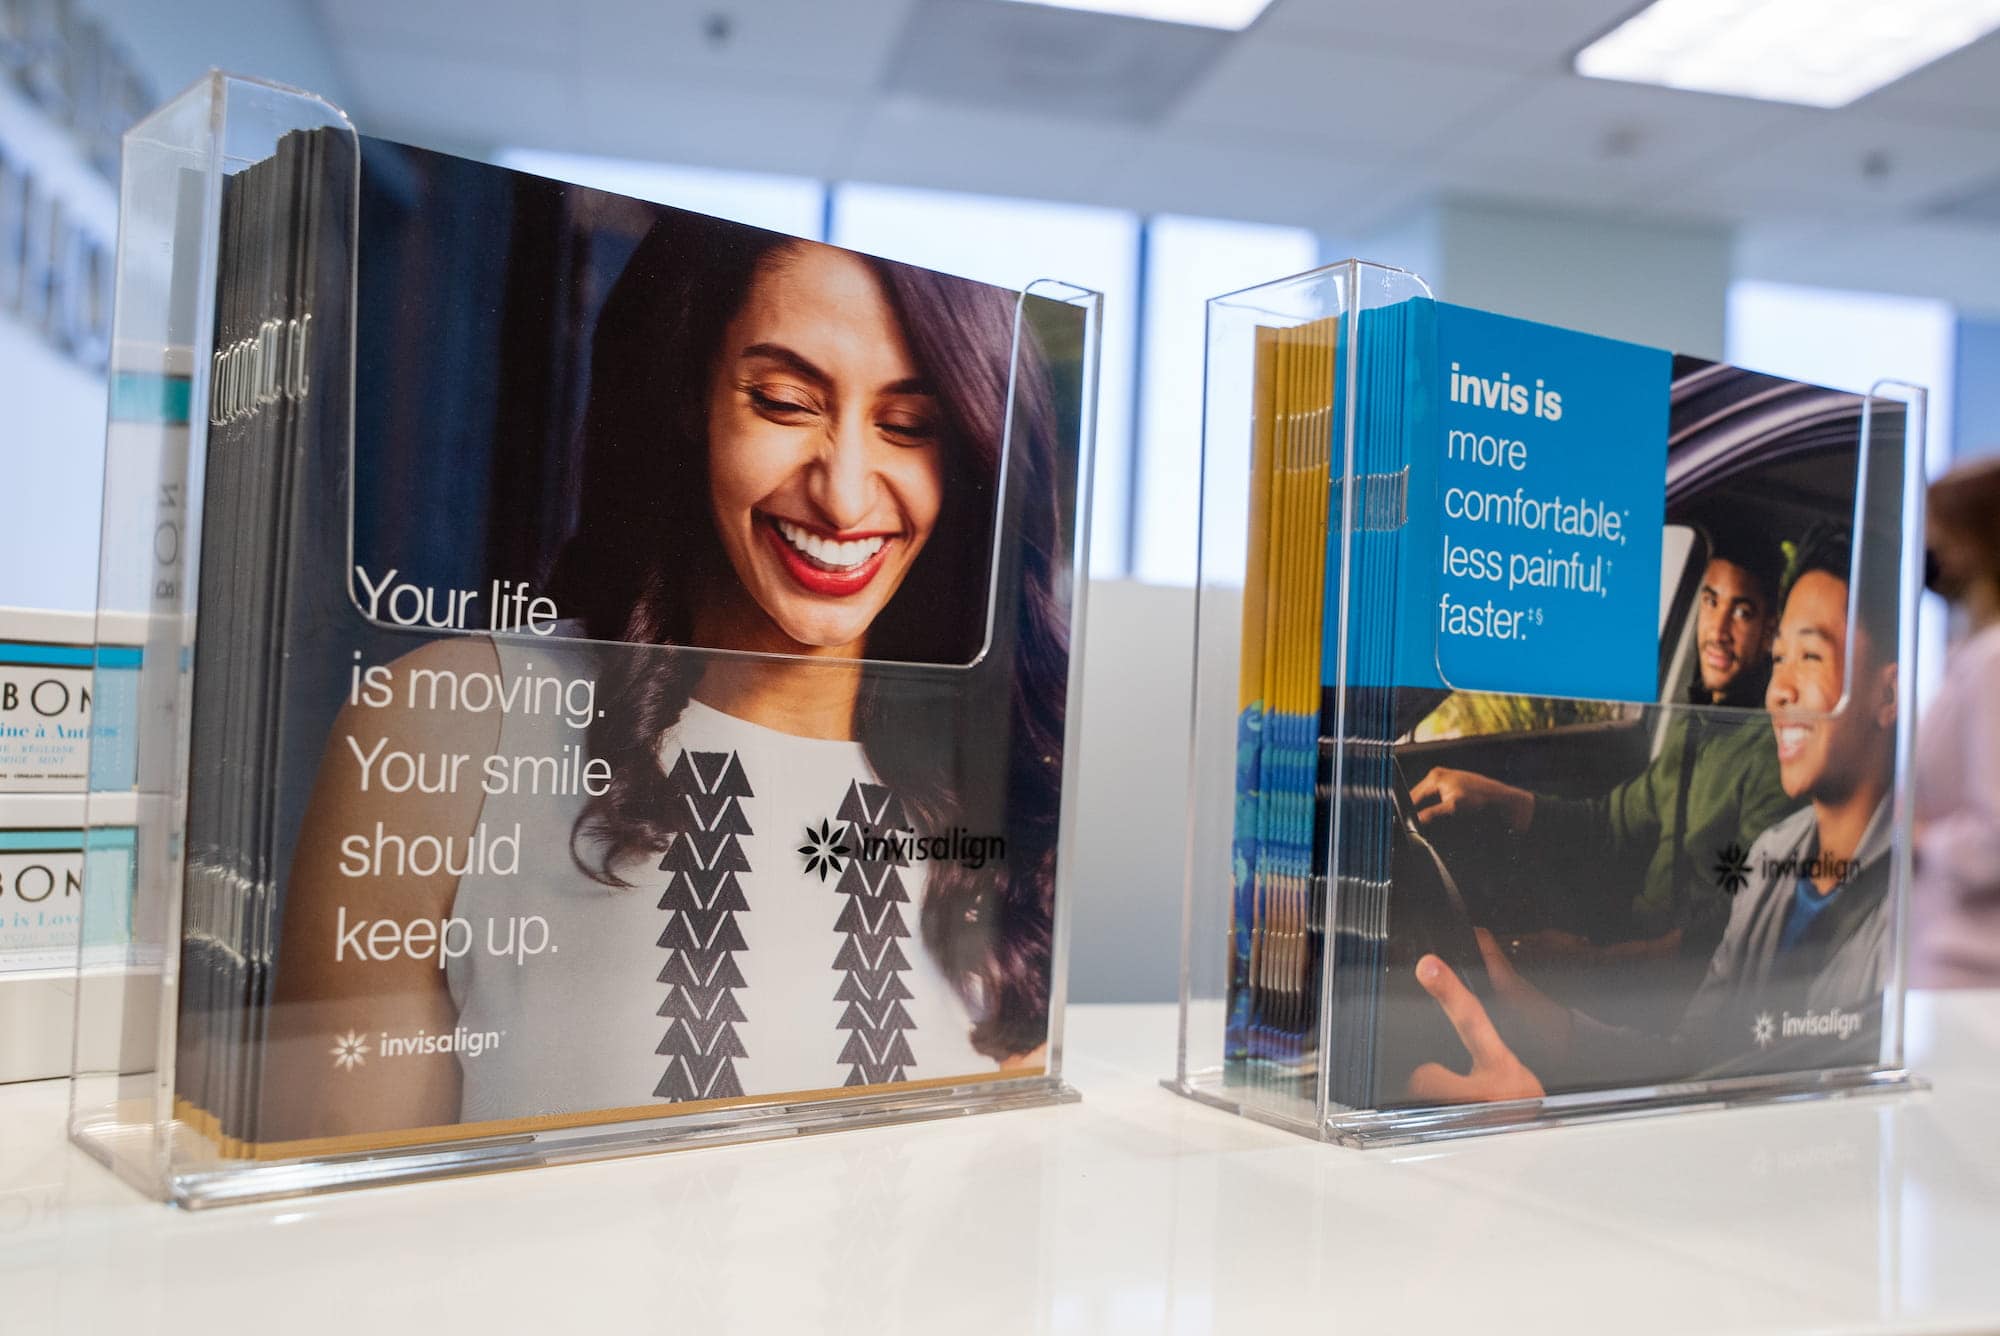 A display of Invisalign promotional material.